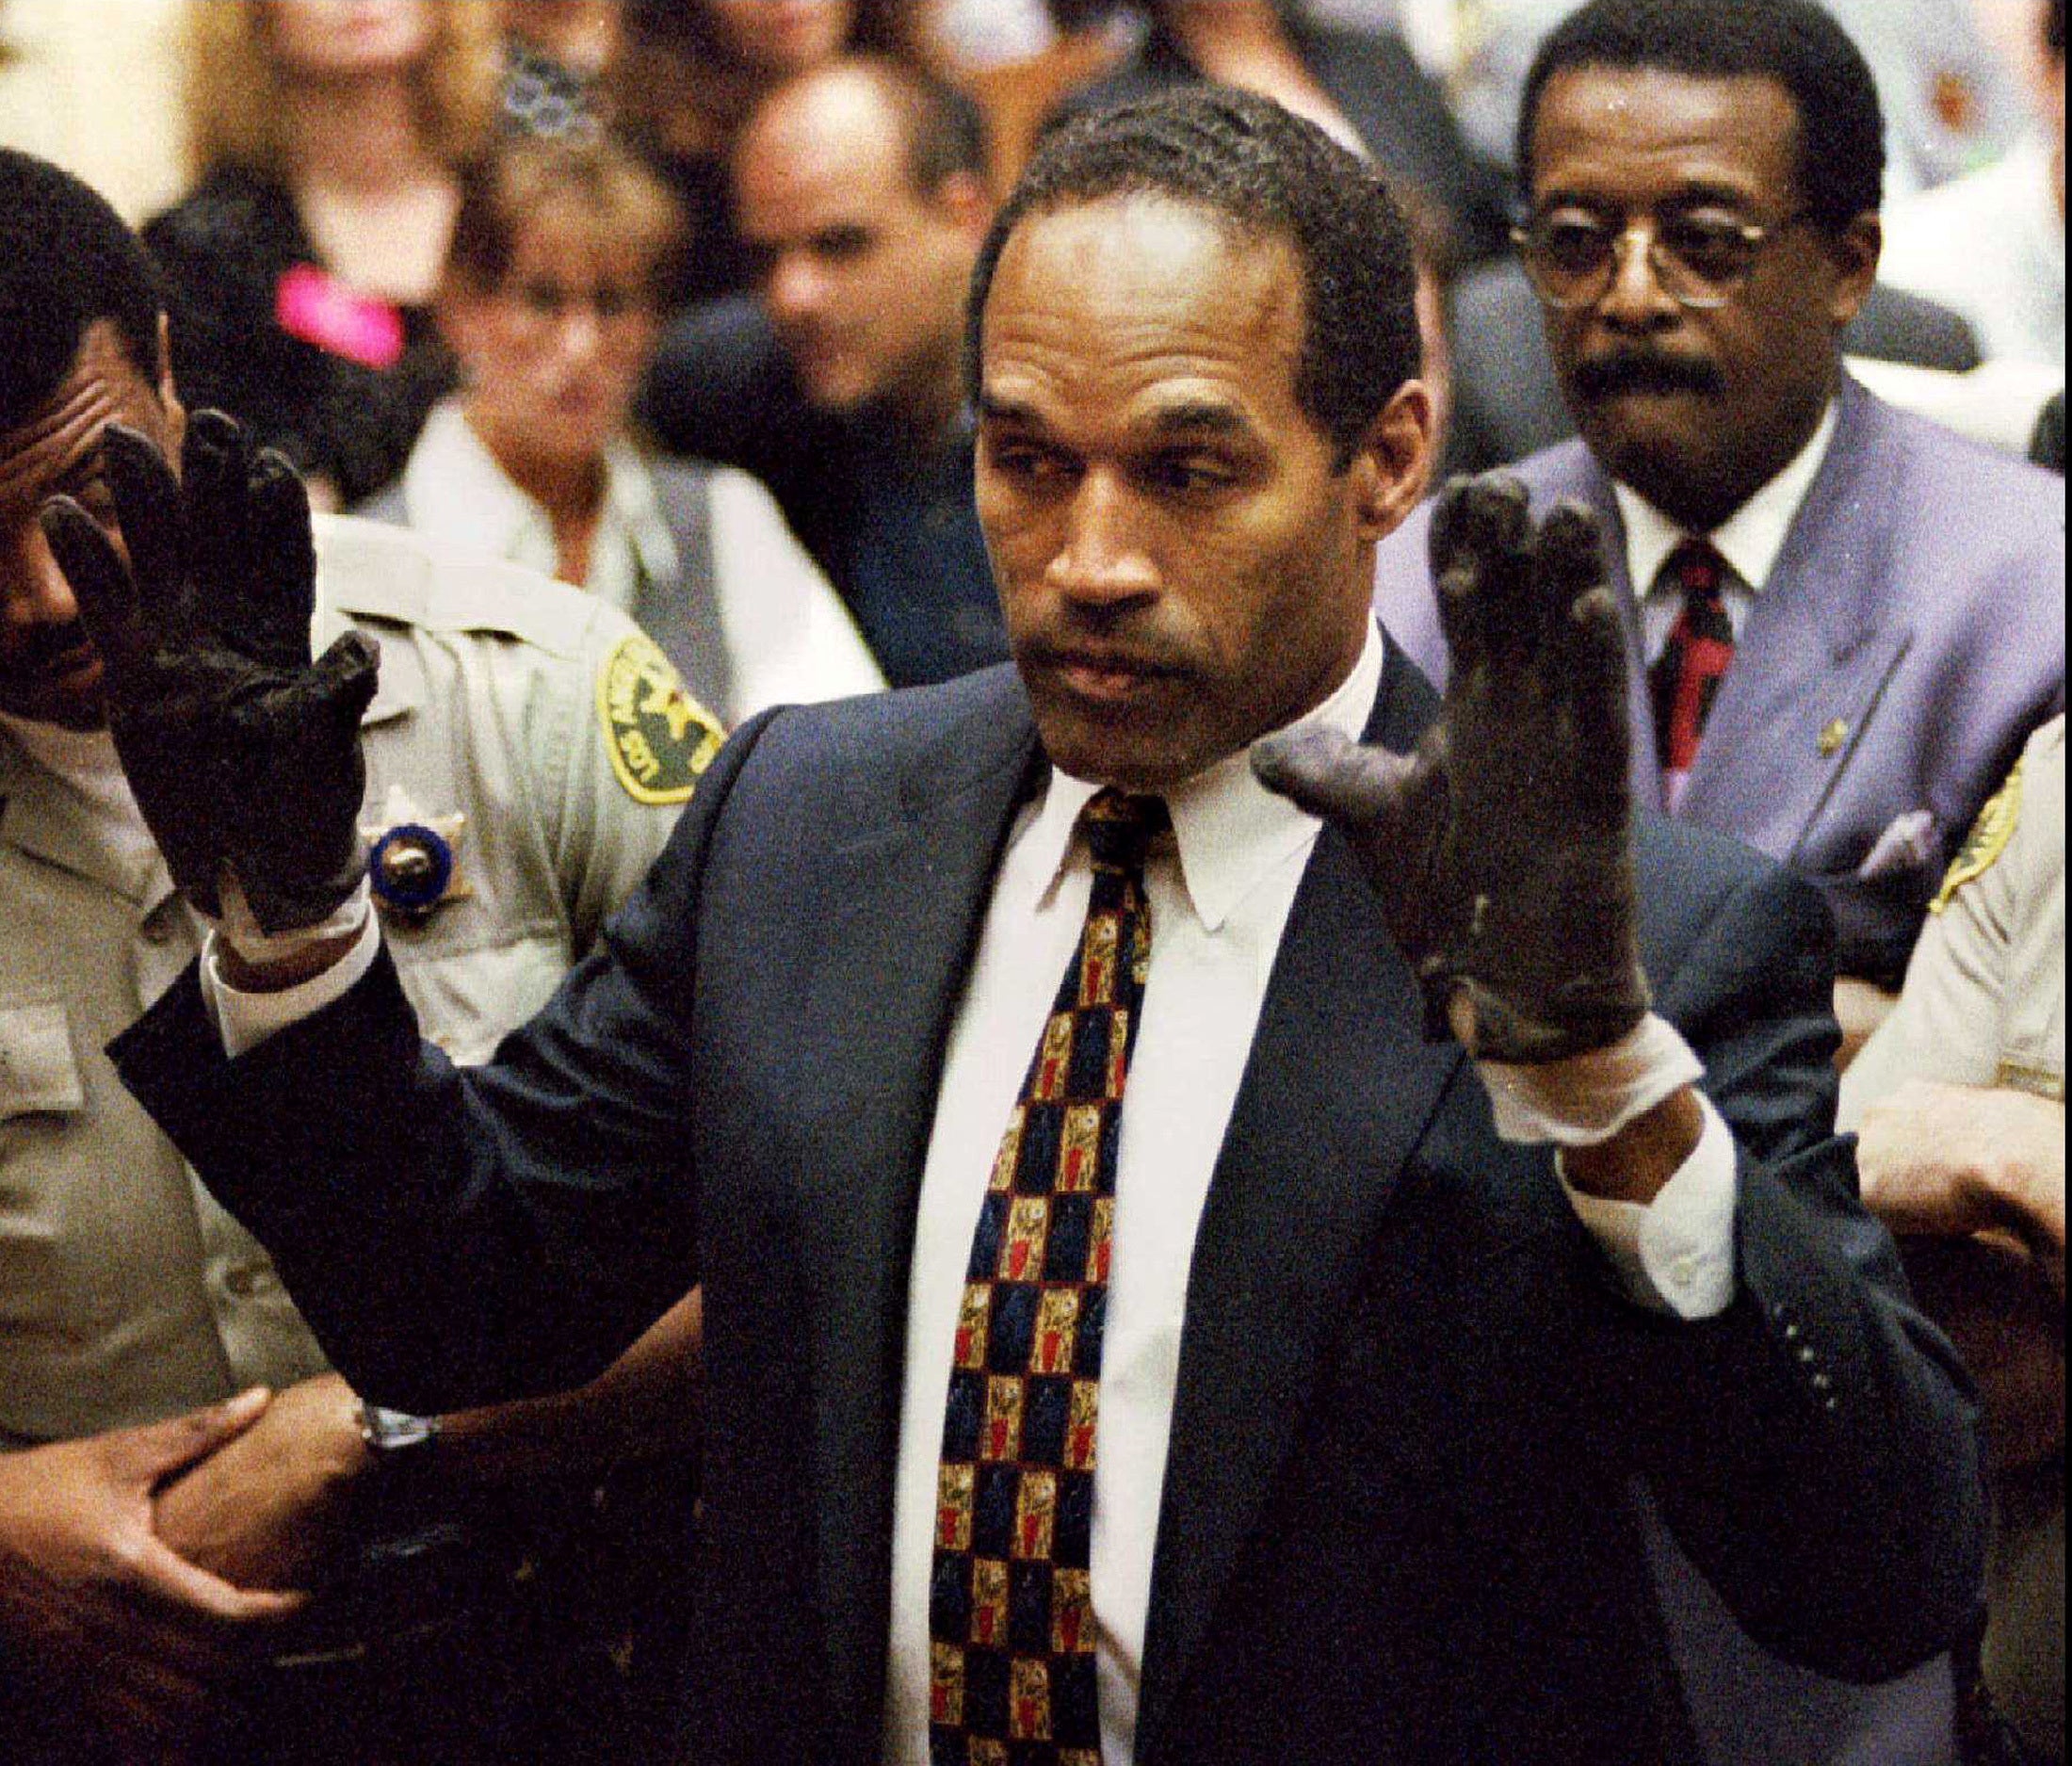 Simpson wearing the blood stained gloves found by Los Angeles Police and entered into evidence in Simpson's murder trial